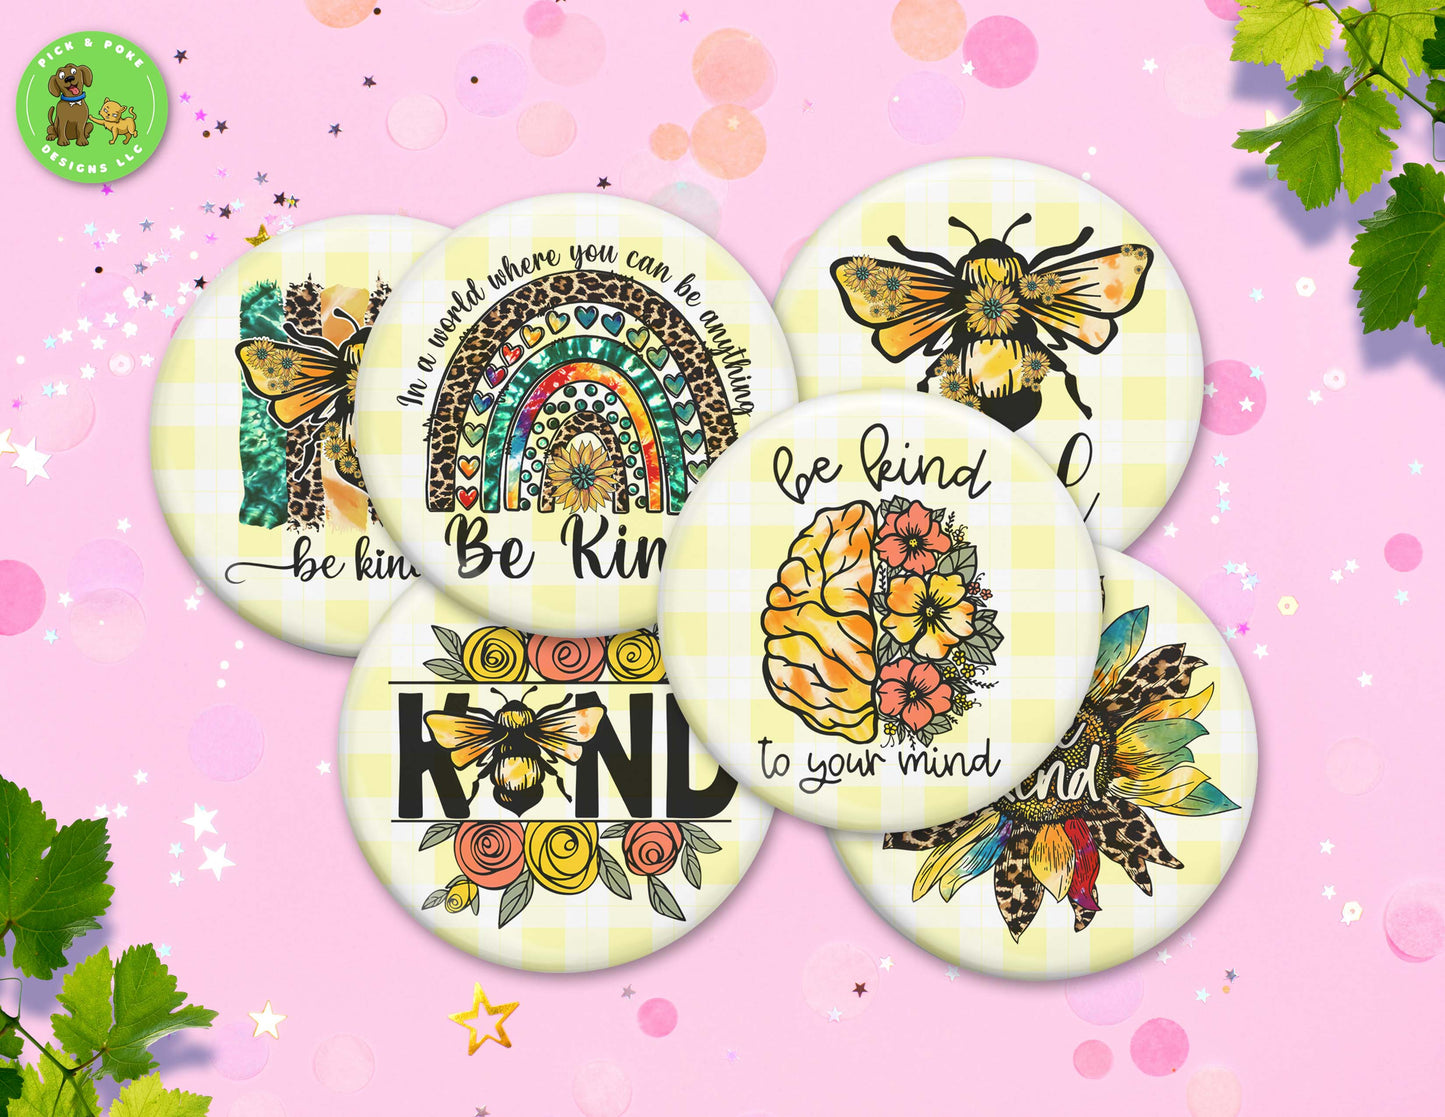 Bee Kind Mental Wellness | Pin-Back Button, Key Chain, Magnet, Bottle Opener, or Mirror Option | 2.25-inch Round Size | Made to Order